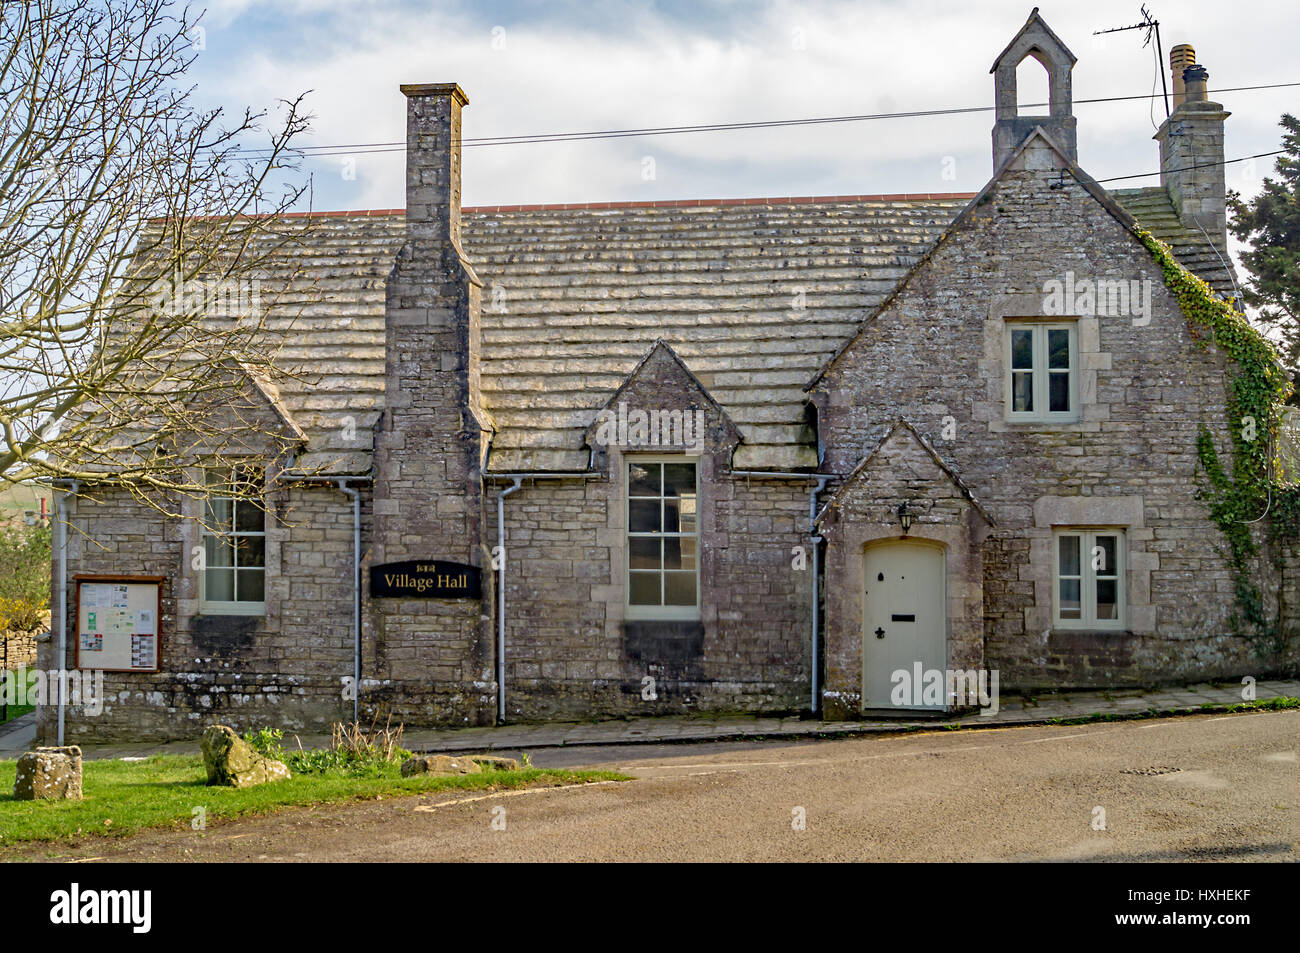 The English country Village Hall in Dorset Stock Photo